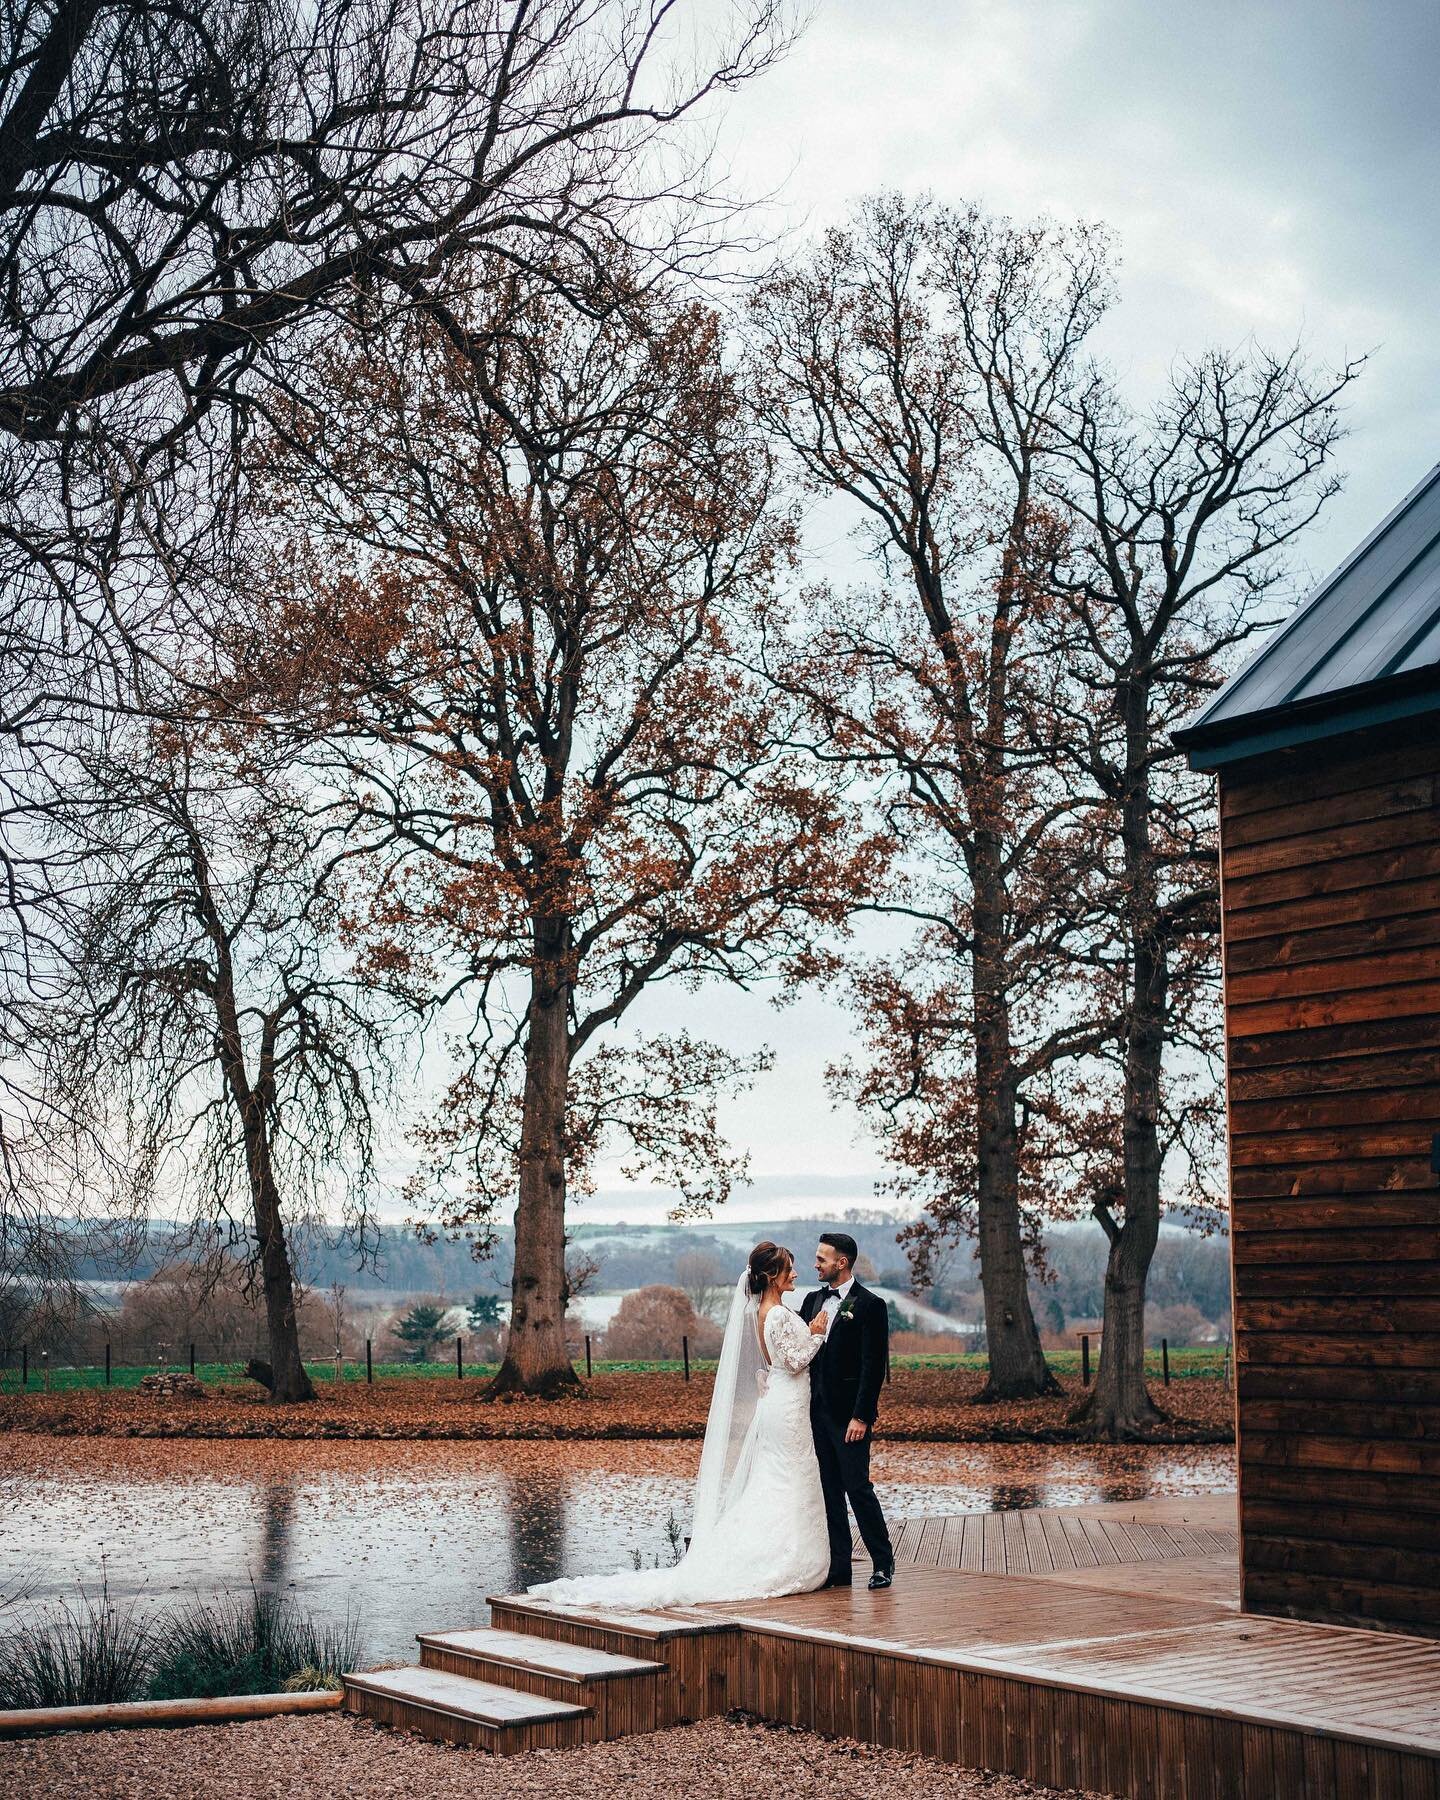 Lucy &amp; Pete 

Boat house on the lake at Garthmyl Hall

Venue: @garthmylhall 
Dress - @tdrbridalbirmingham 
Hair - @vanity.hair.beauty 
Make up - Katherine Lear (klear)
Suits - @peterposhsuit Flowers: @tmsevents